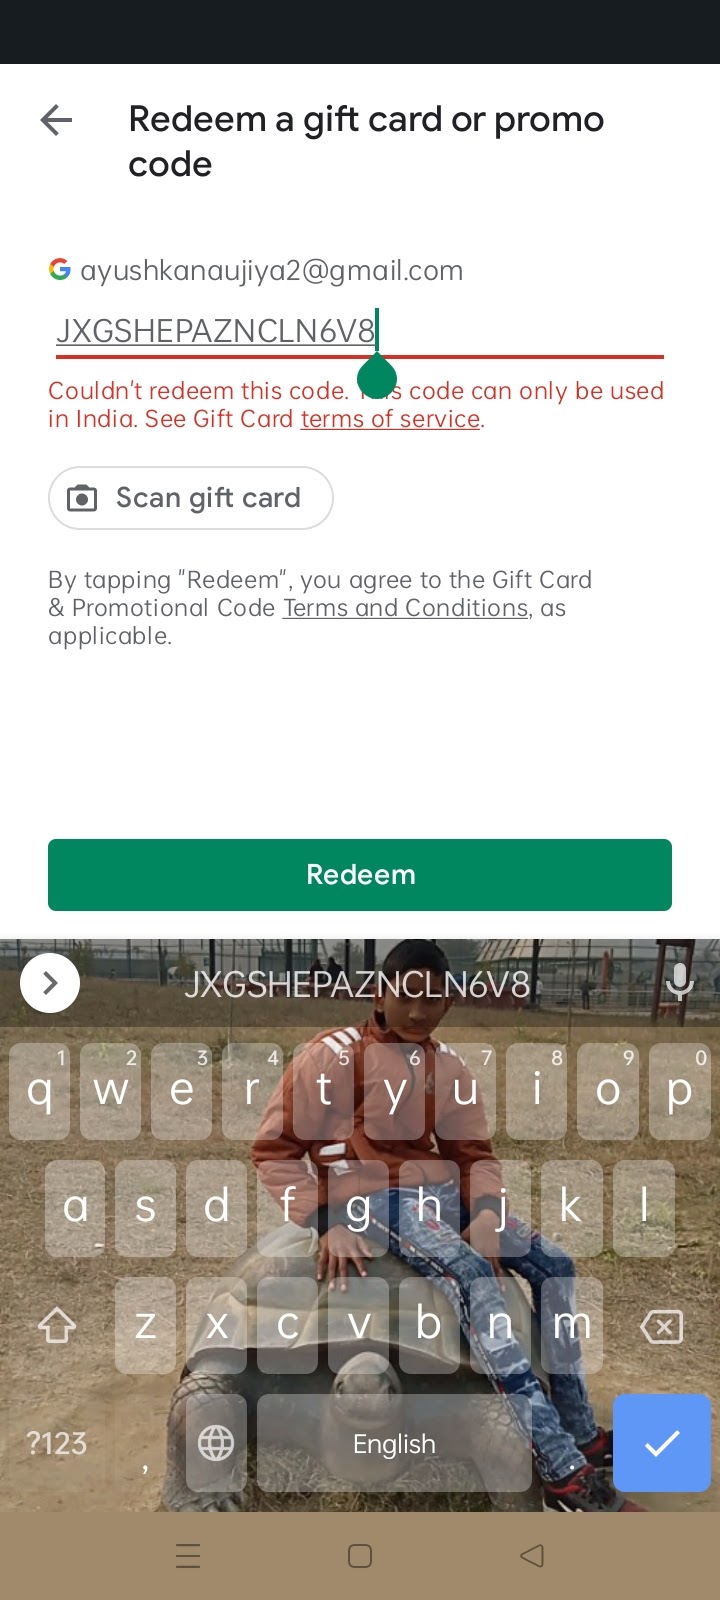 We need more information reedem your gift card - Google Play Community